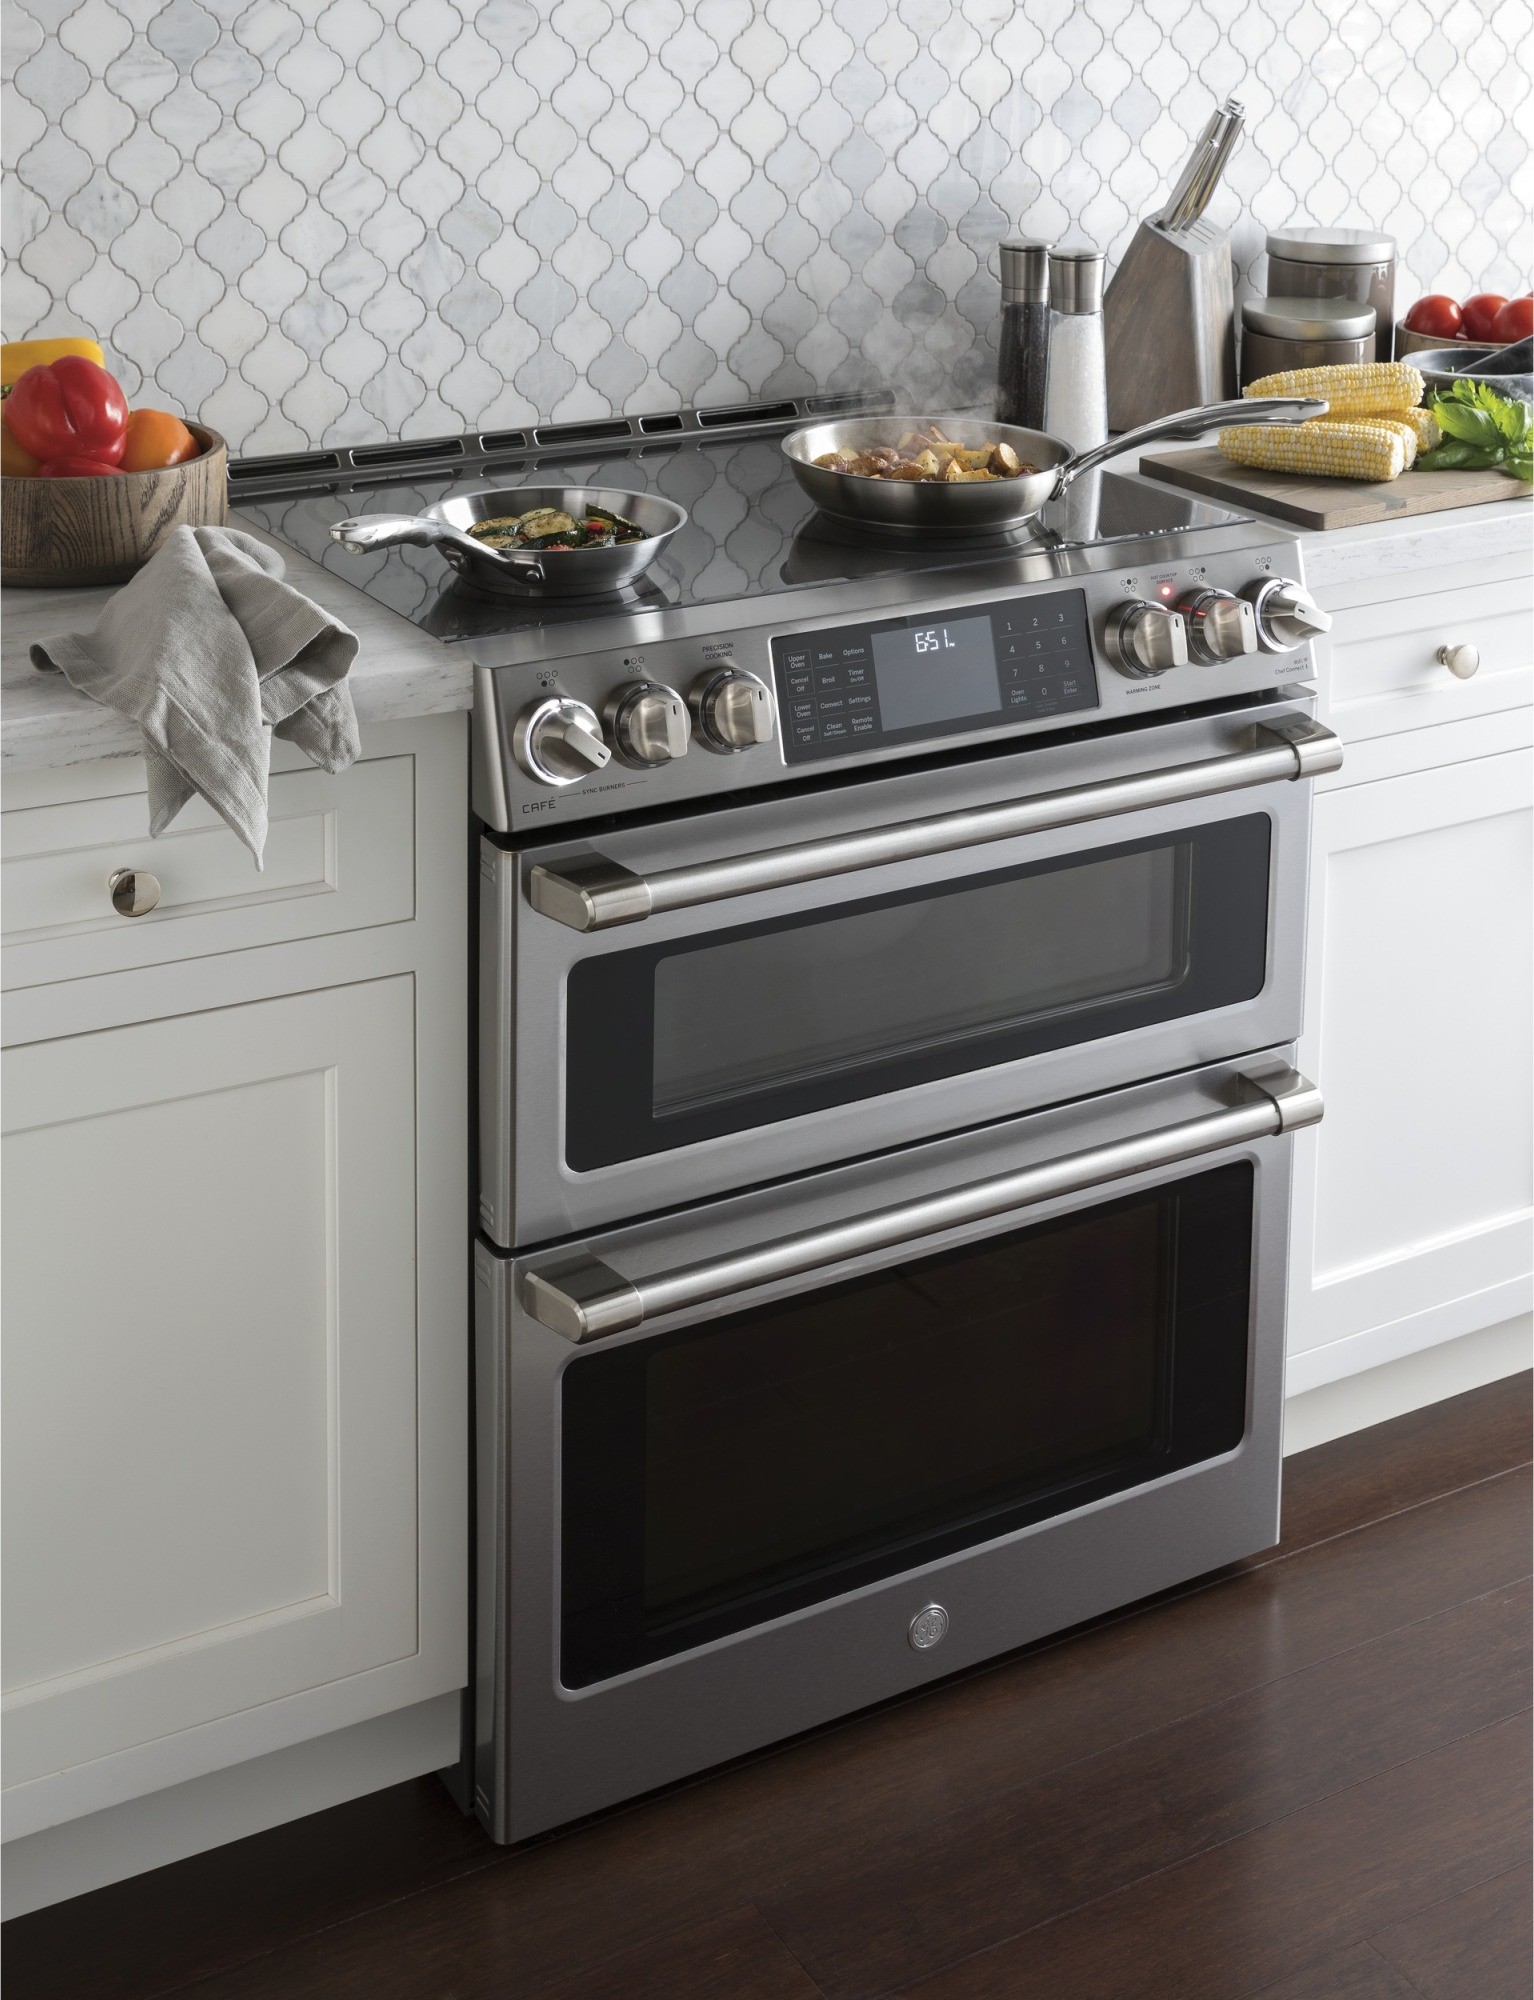 ge stove with convection oven